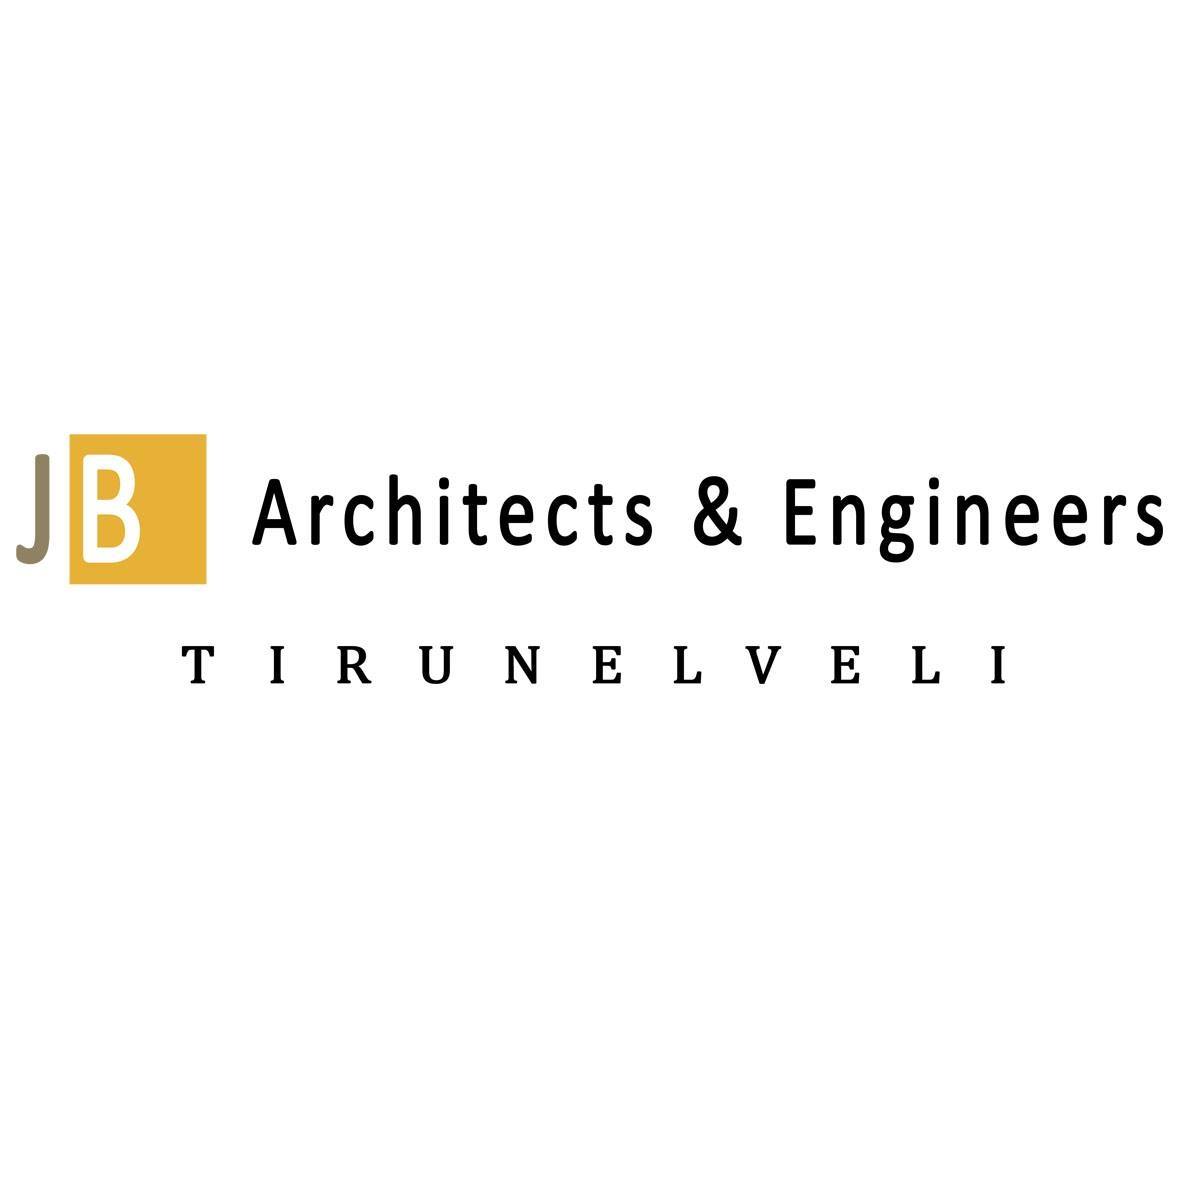 JB Architects & Engineers|Accounting Services|Professional Services